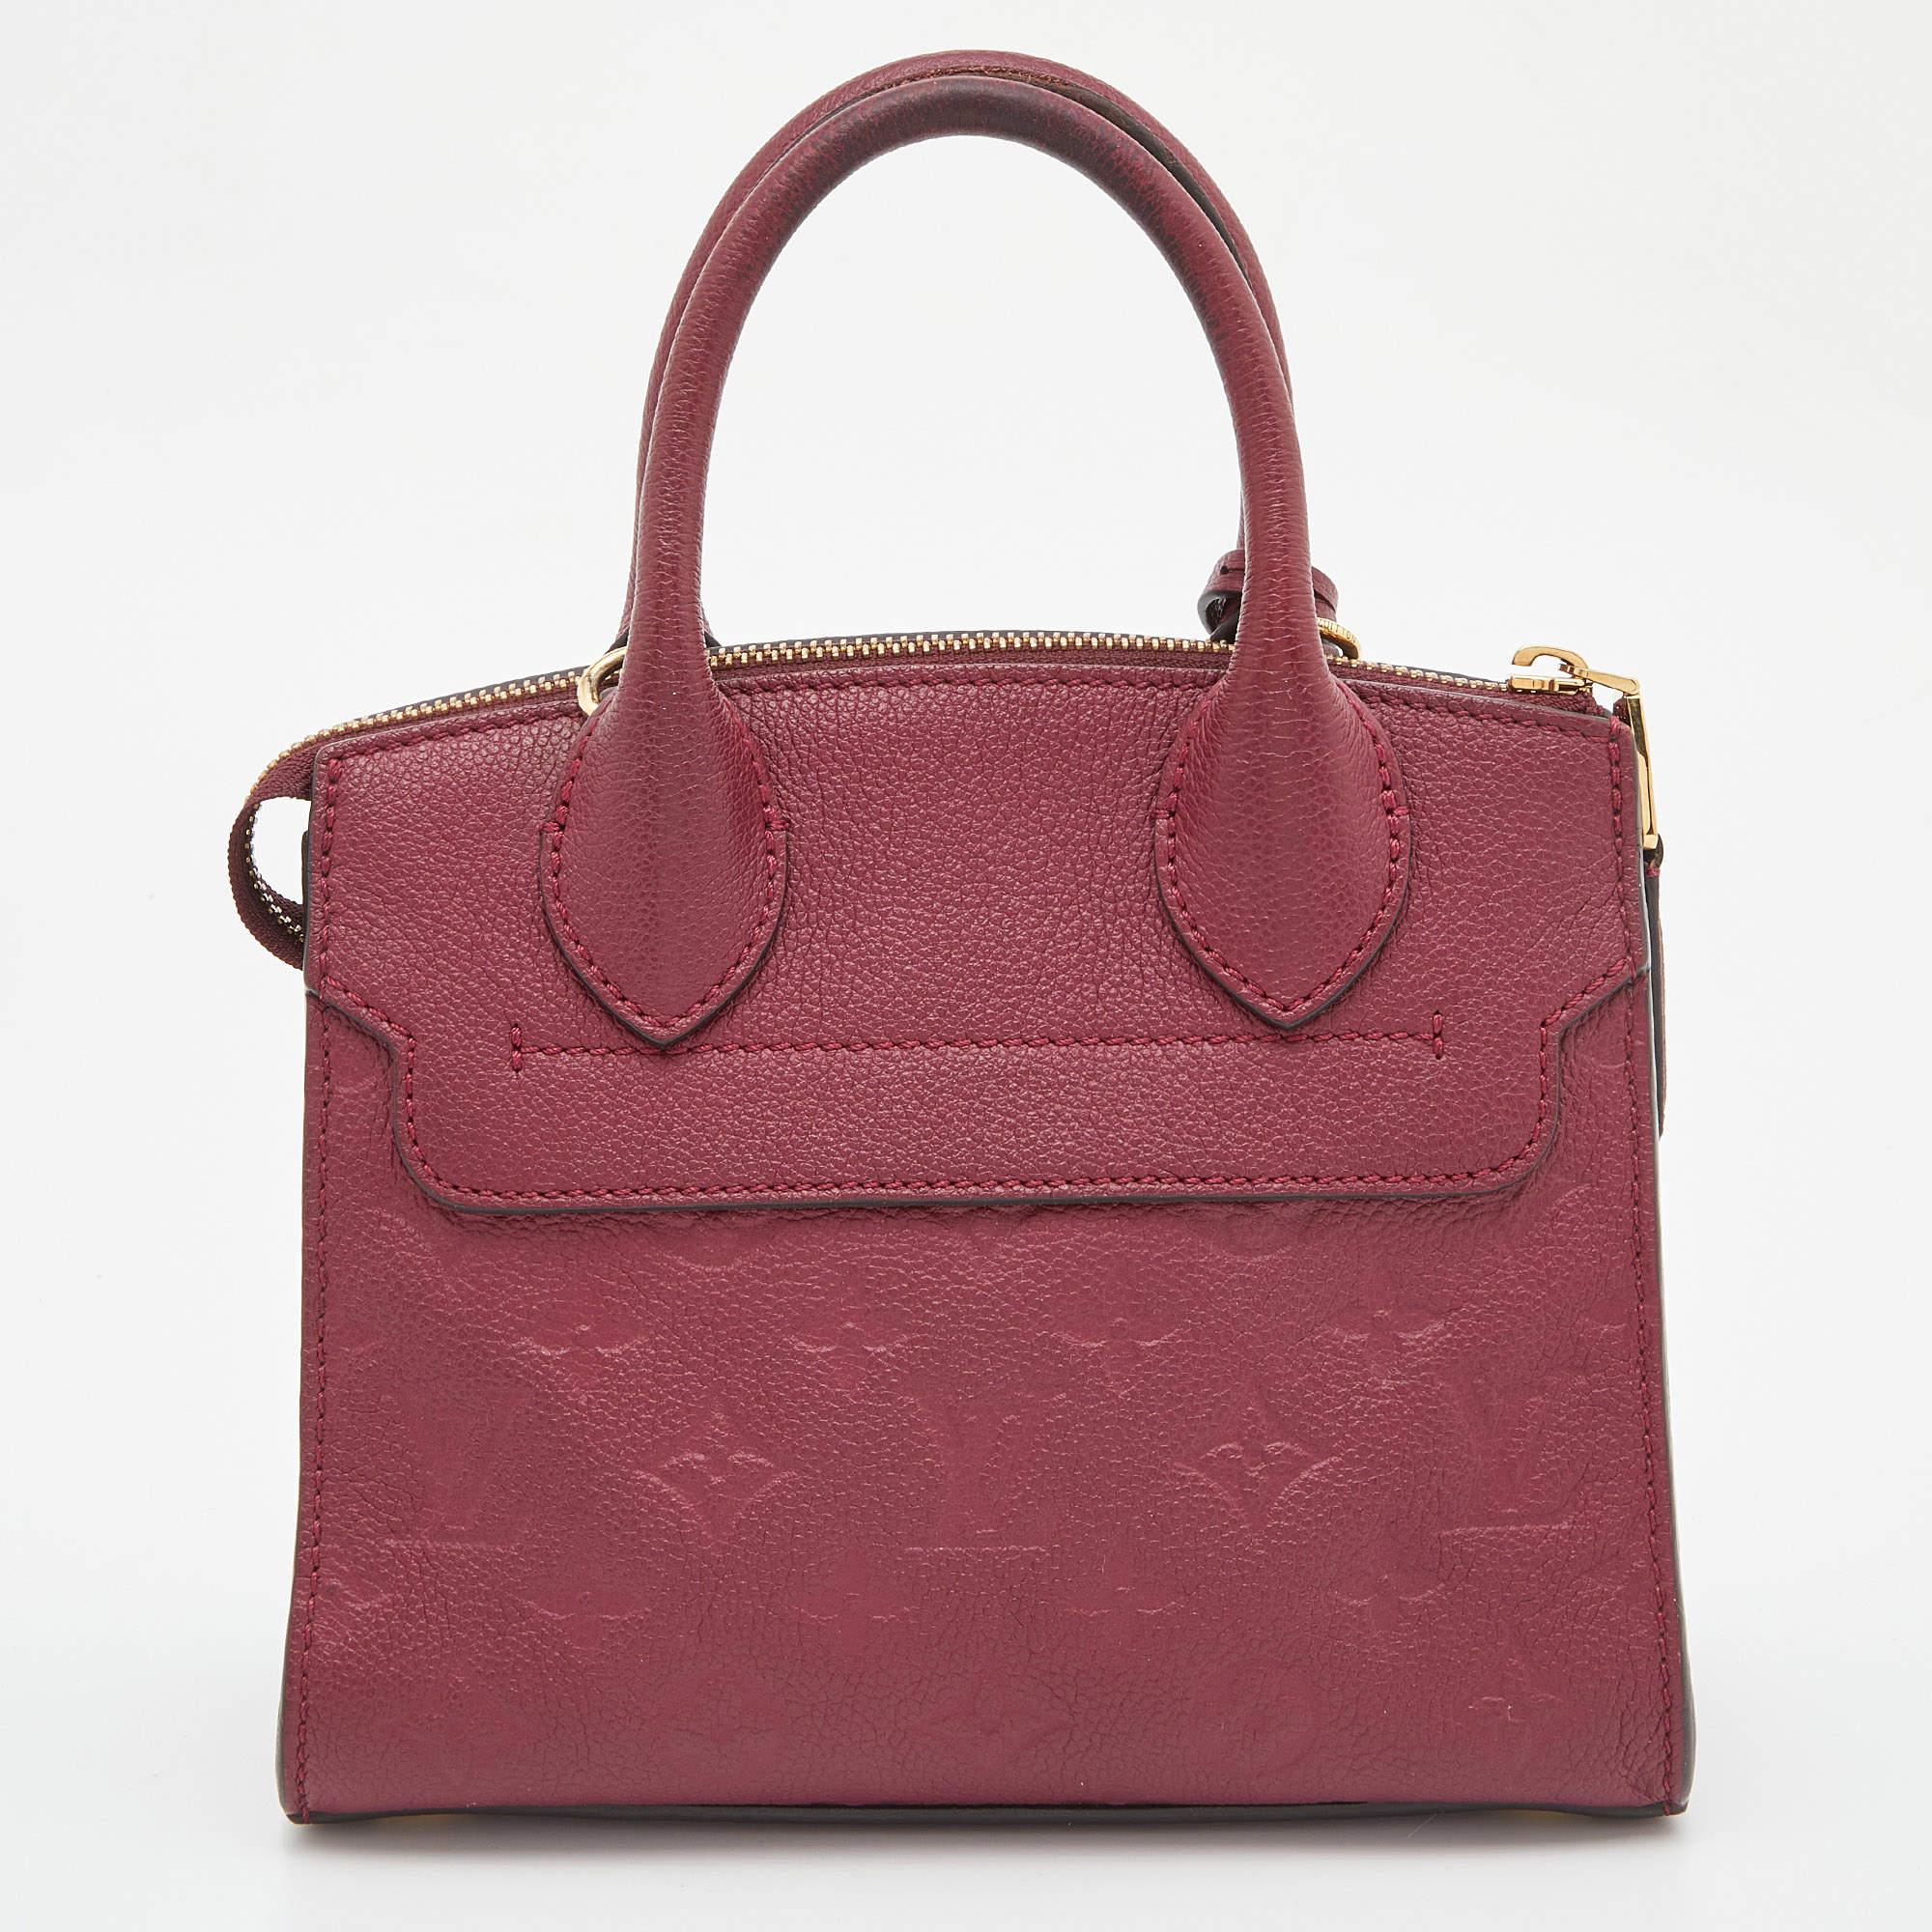 Designed to delight and assist, this Pont Neuf mini by Louis Vuitton is a bag worth the buy! Crafted in Spain, it is made from Monogram Empreinte leather and comes in a lovely shade.

Includes: Detachable Strap

